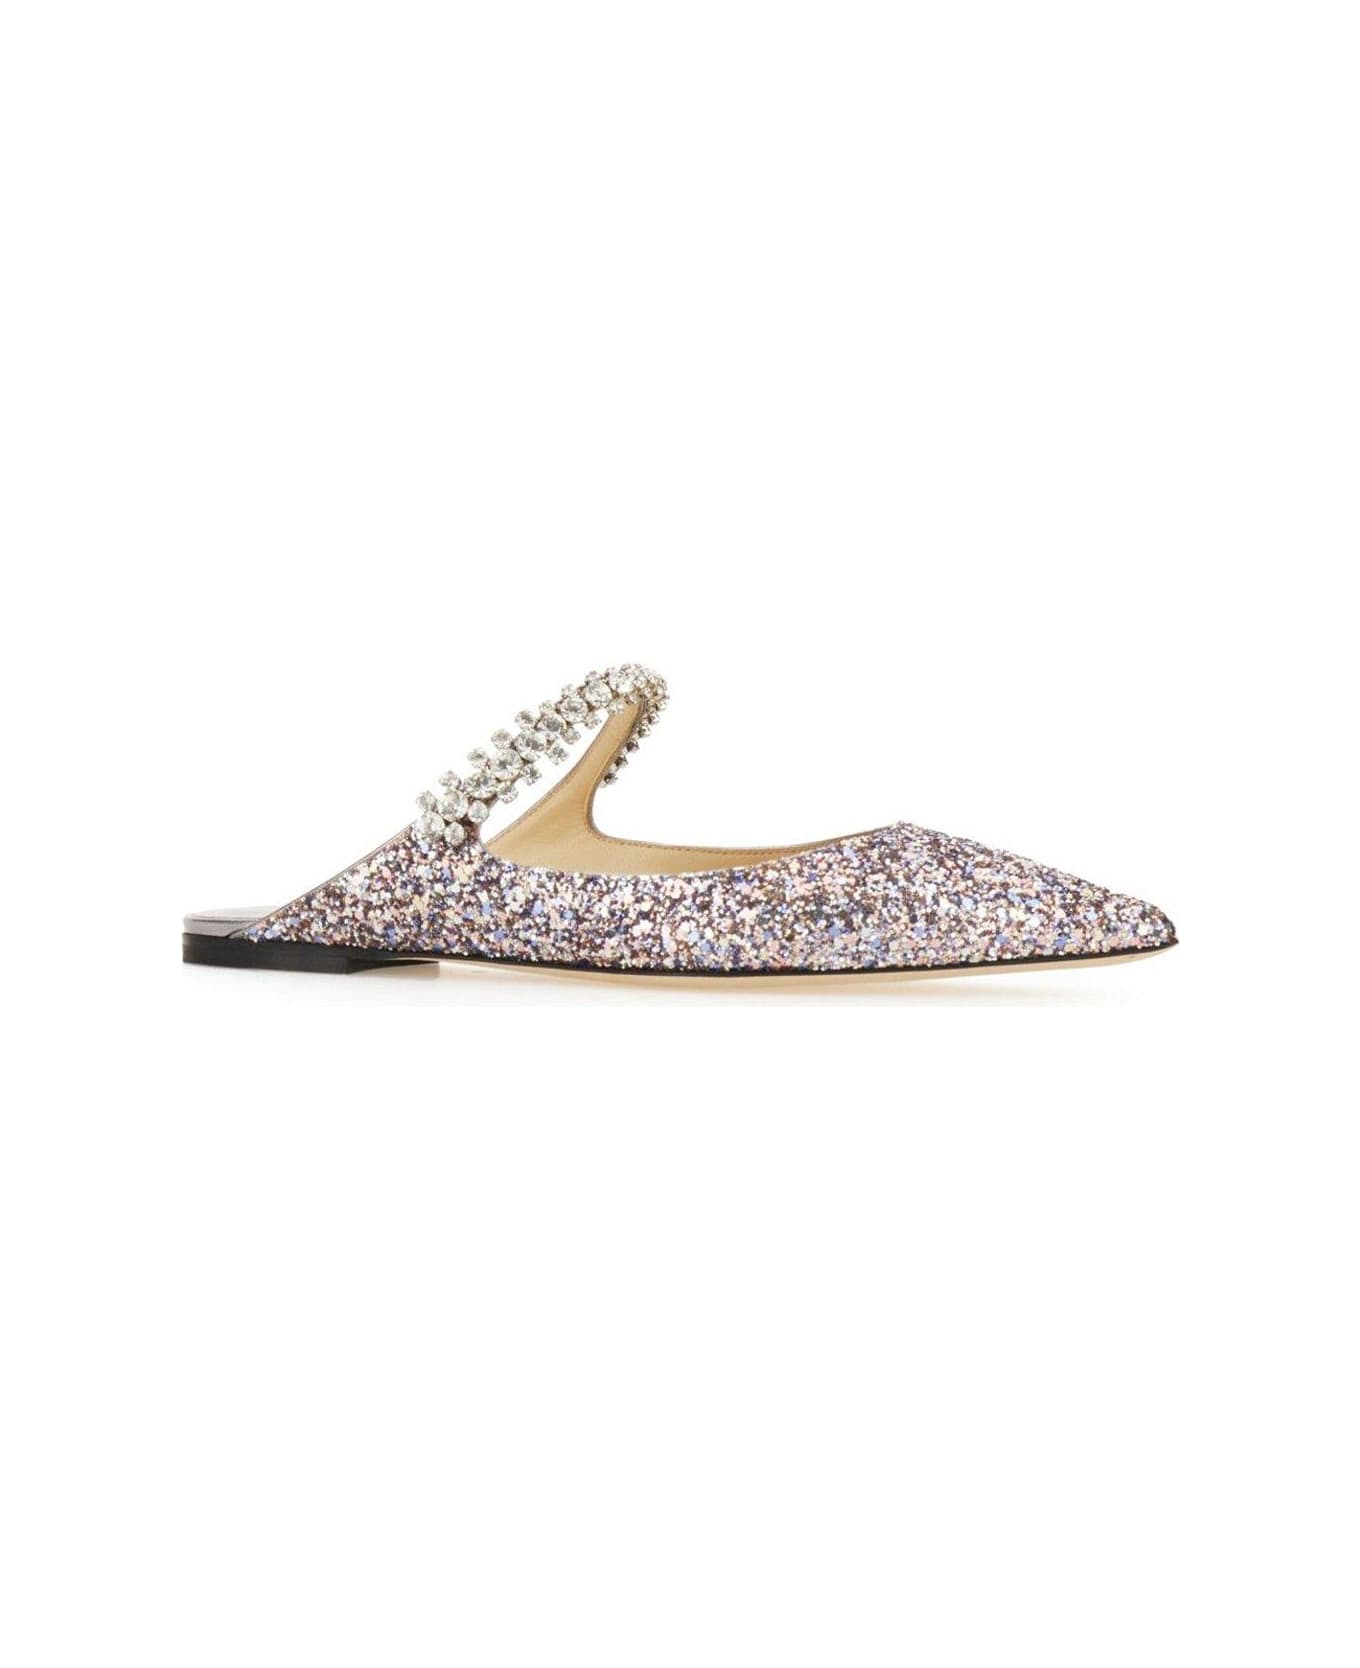 Jimmy Choo Bing Embellished Pointed Toe Ballerina Shoes - Silver